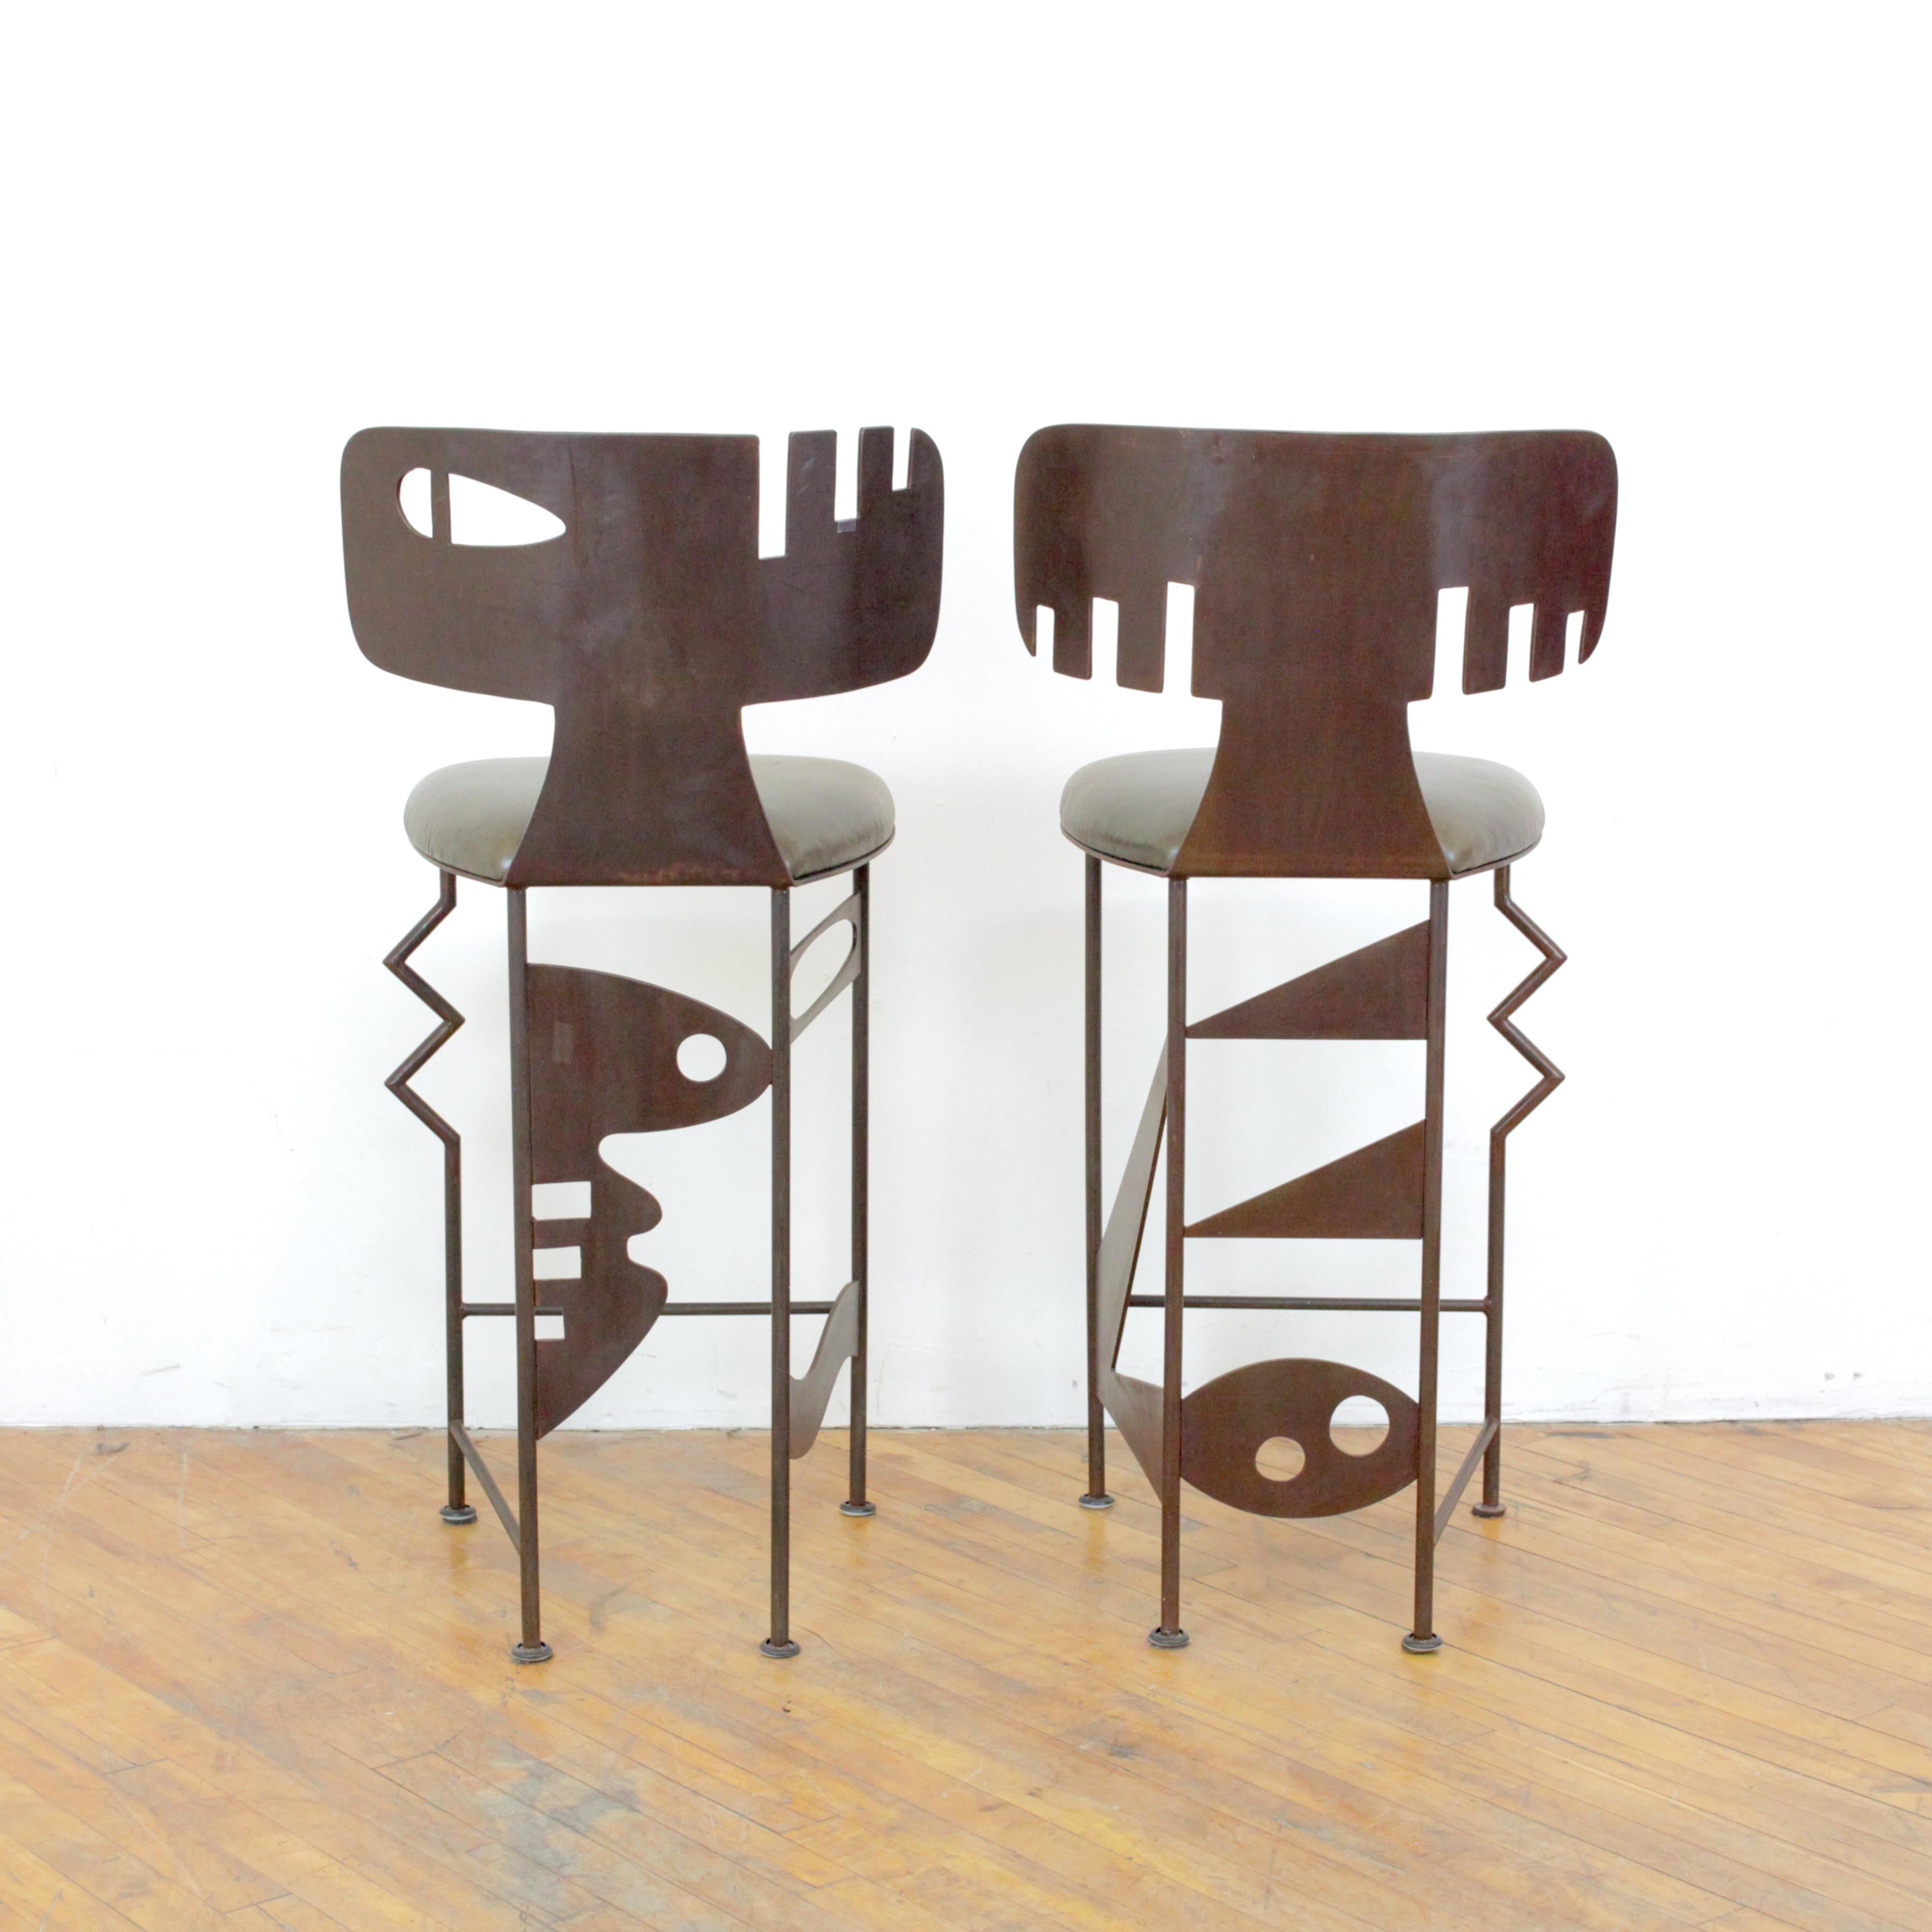 Pair of Gregory Hawthorne Sculptural Stools In Good Condition For Sale In Oakland, CA